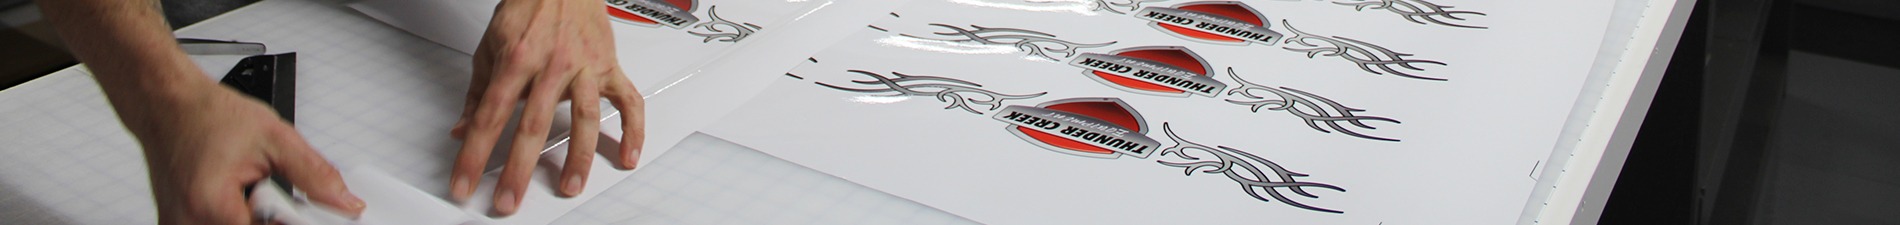 Header image with two hands cutting out Thunder Creek vinyl decals